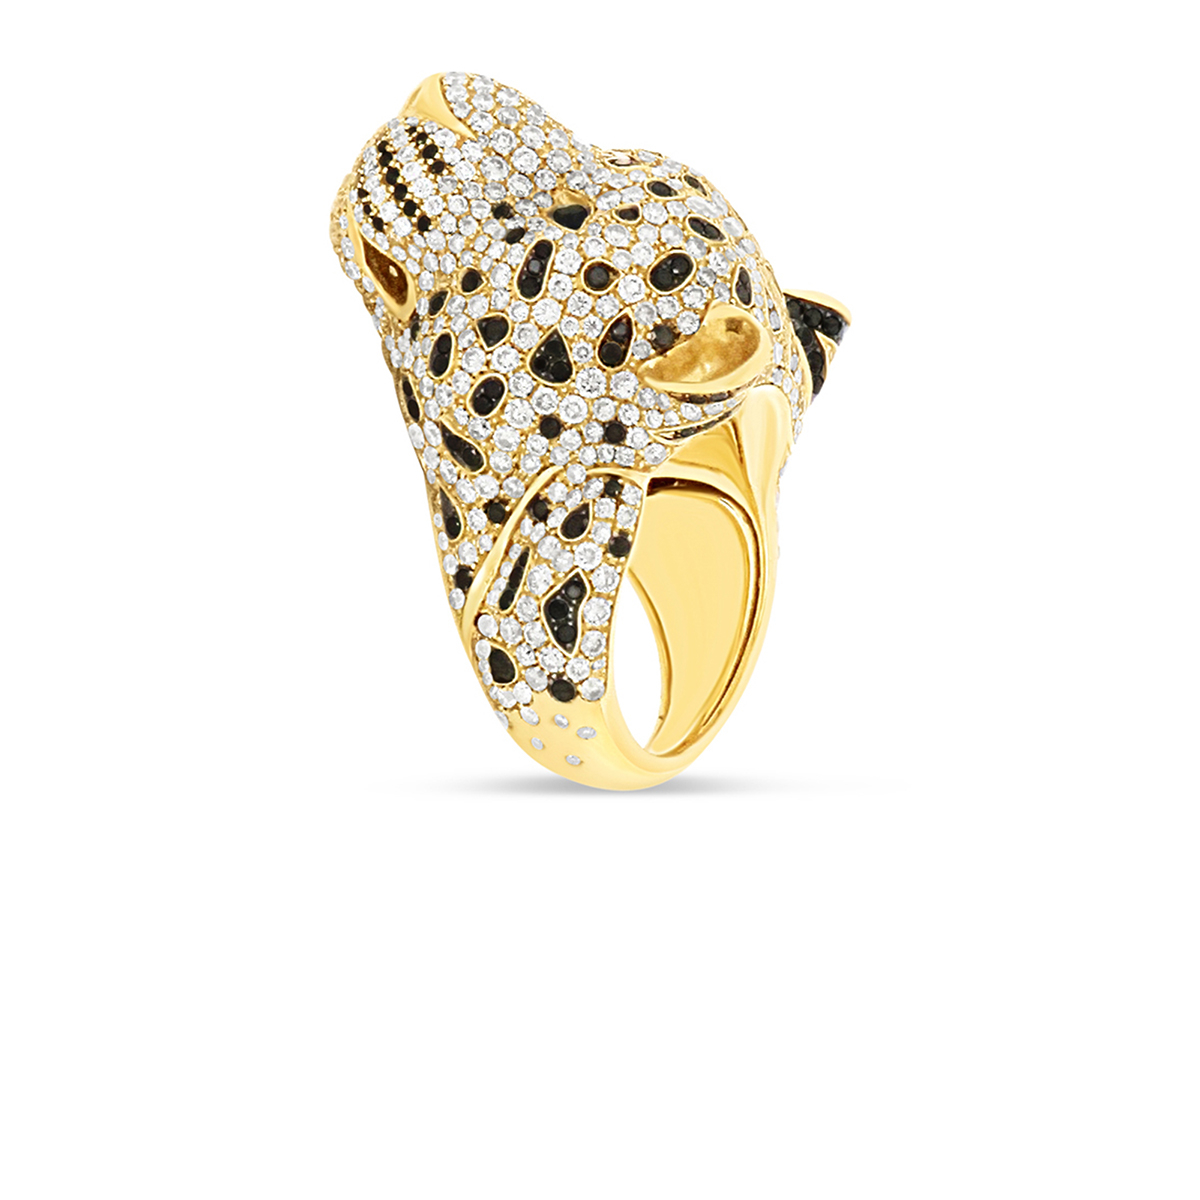 Leopard Cocktail Ring with diamonds and blue sapphires